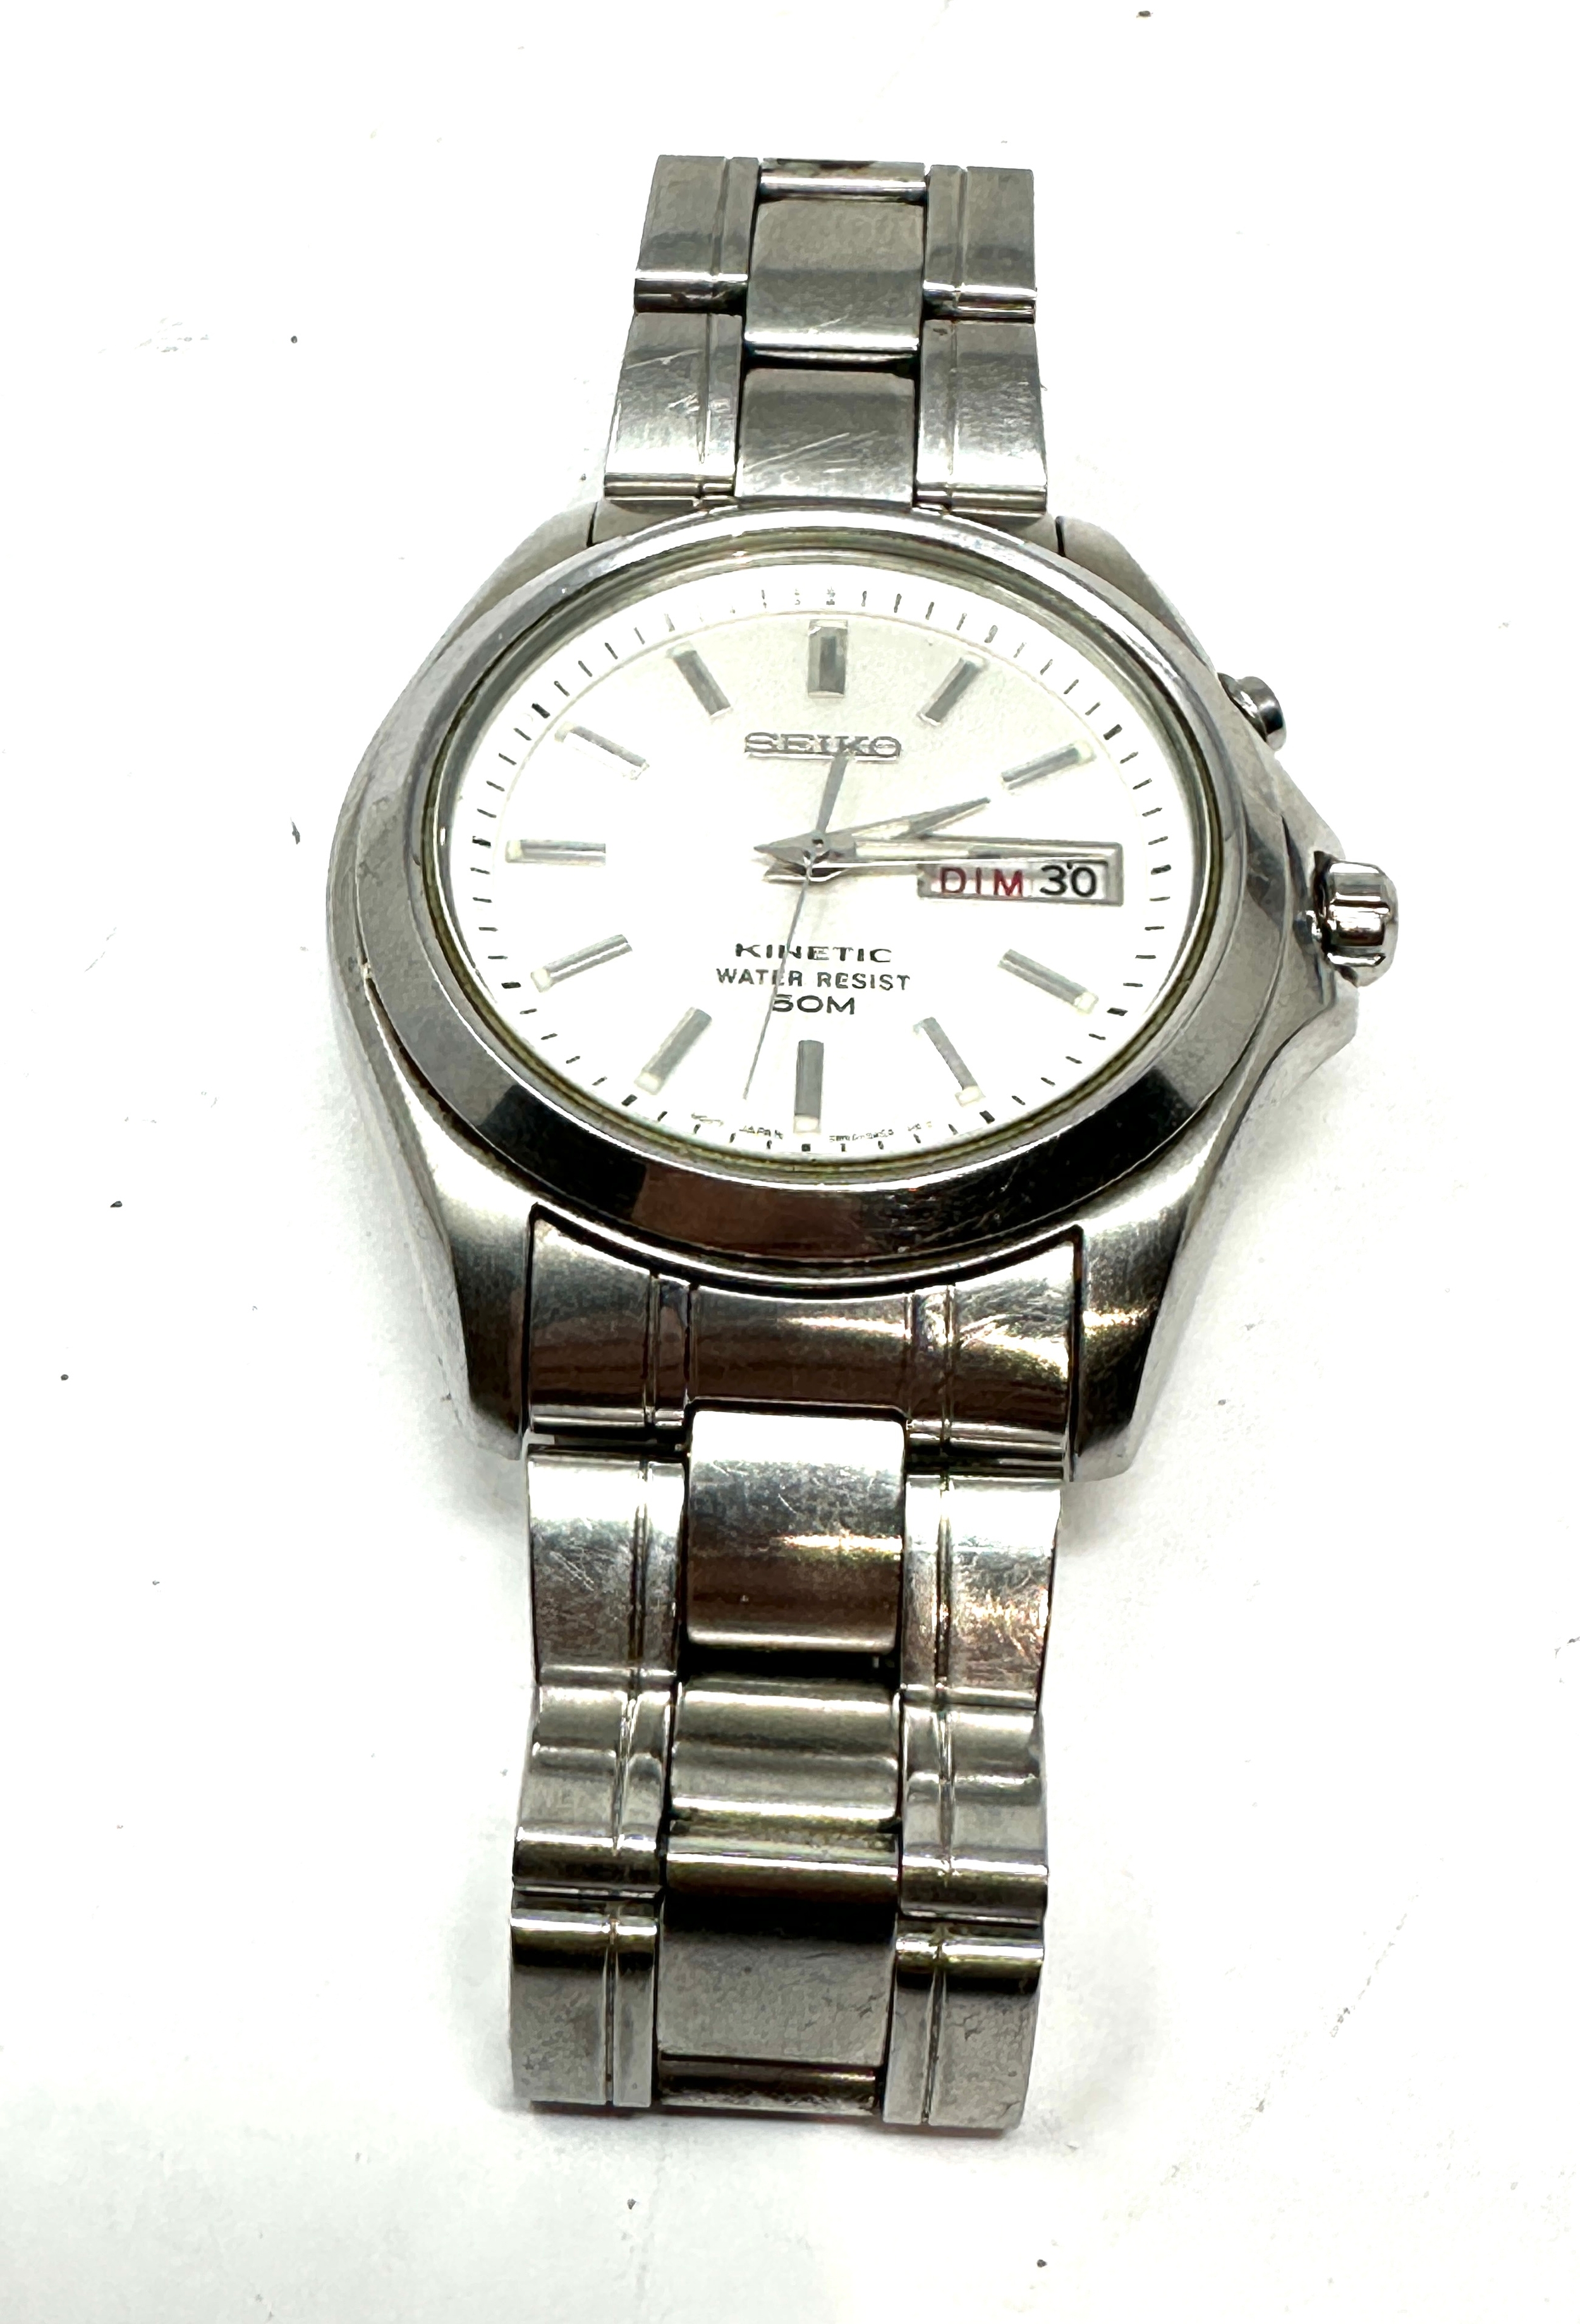 Gents Seiko Kinetic Watch 5M63-0B90 - 50m the watch is ticking